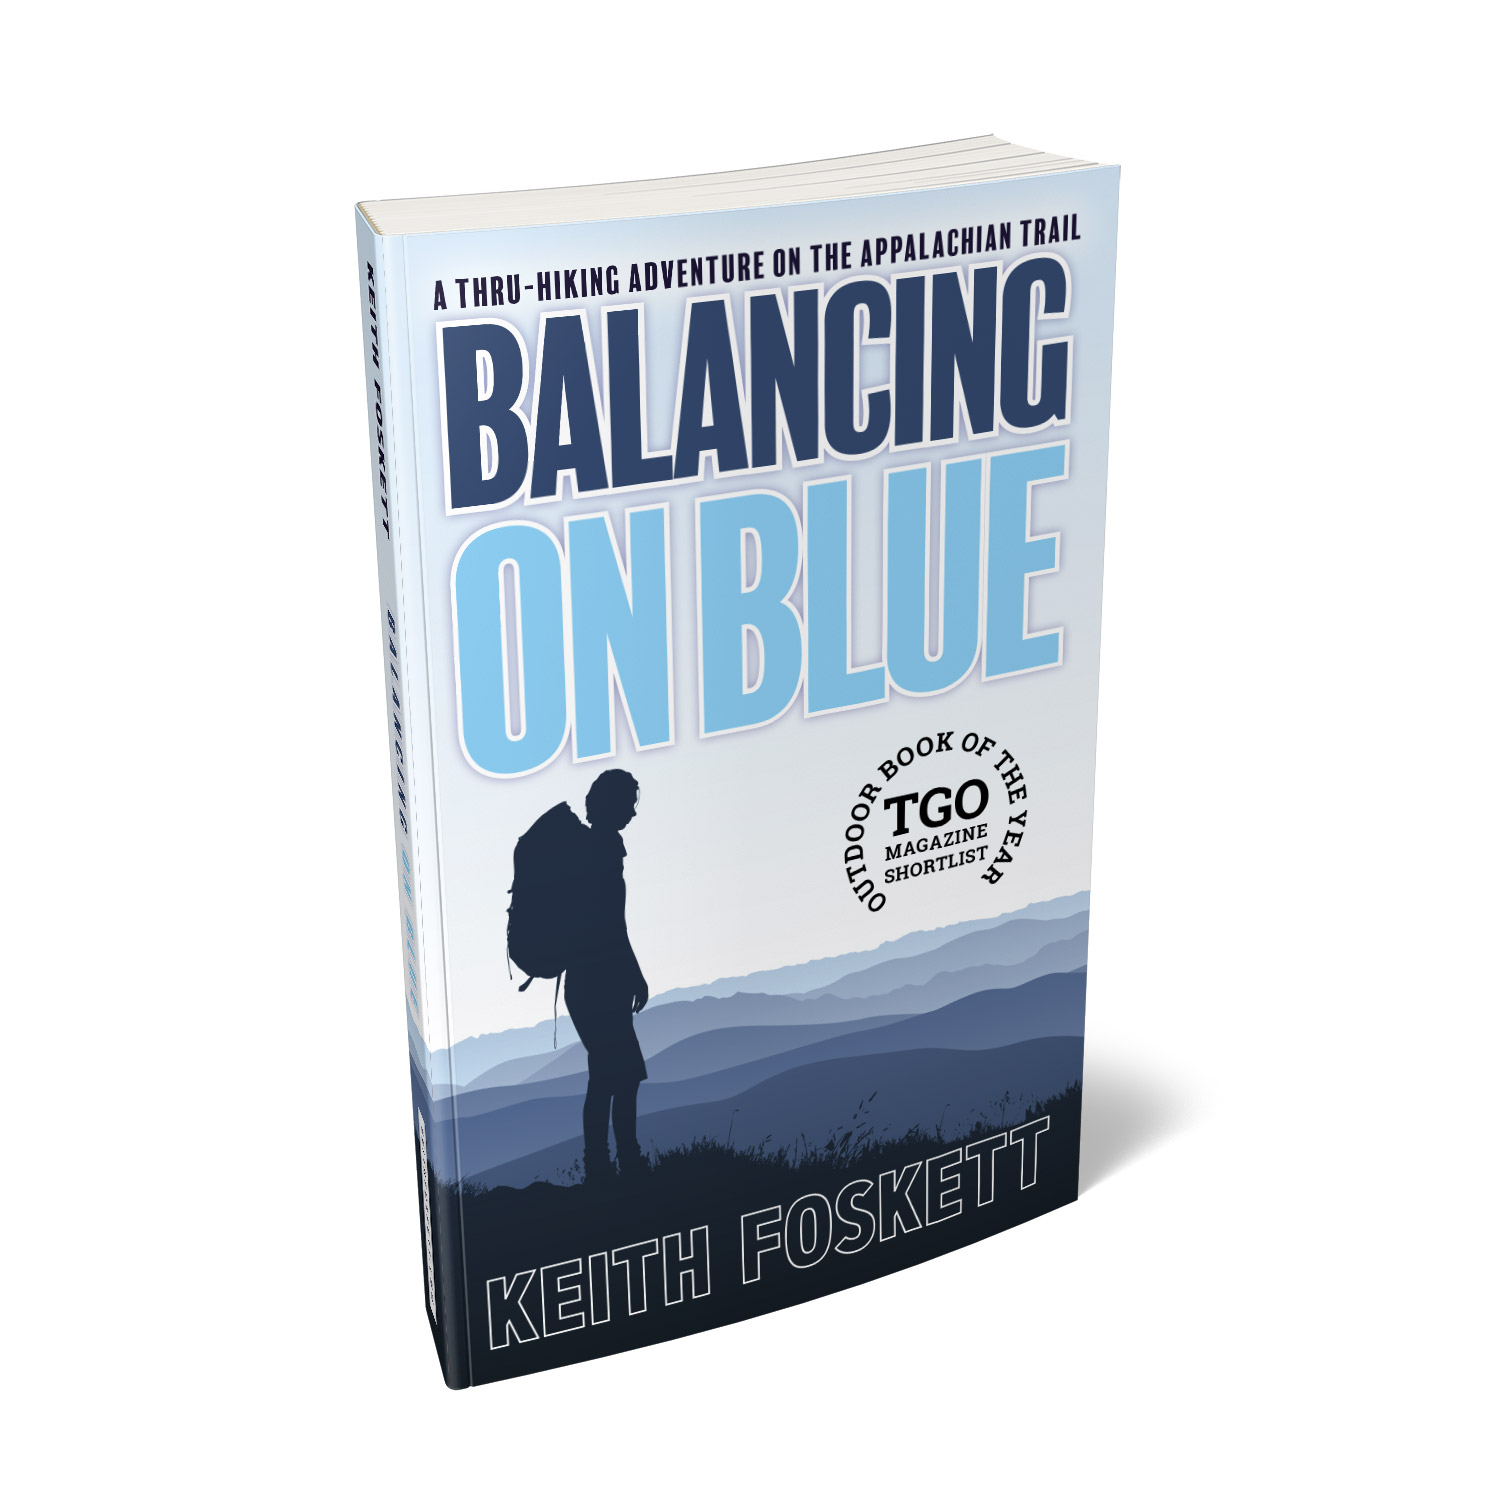 'Balancing On Blue' is an excellent hiking memoir, about one man's thru-hiking adventures in the Appalachians. The author is Keith Foskett. The book cover was designed by Mark Thomas, of coverness.com. To find out more about my book design services, please visit www.coverness.com.